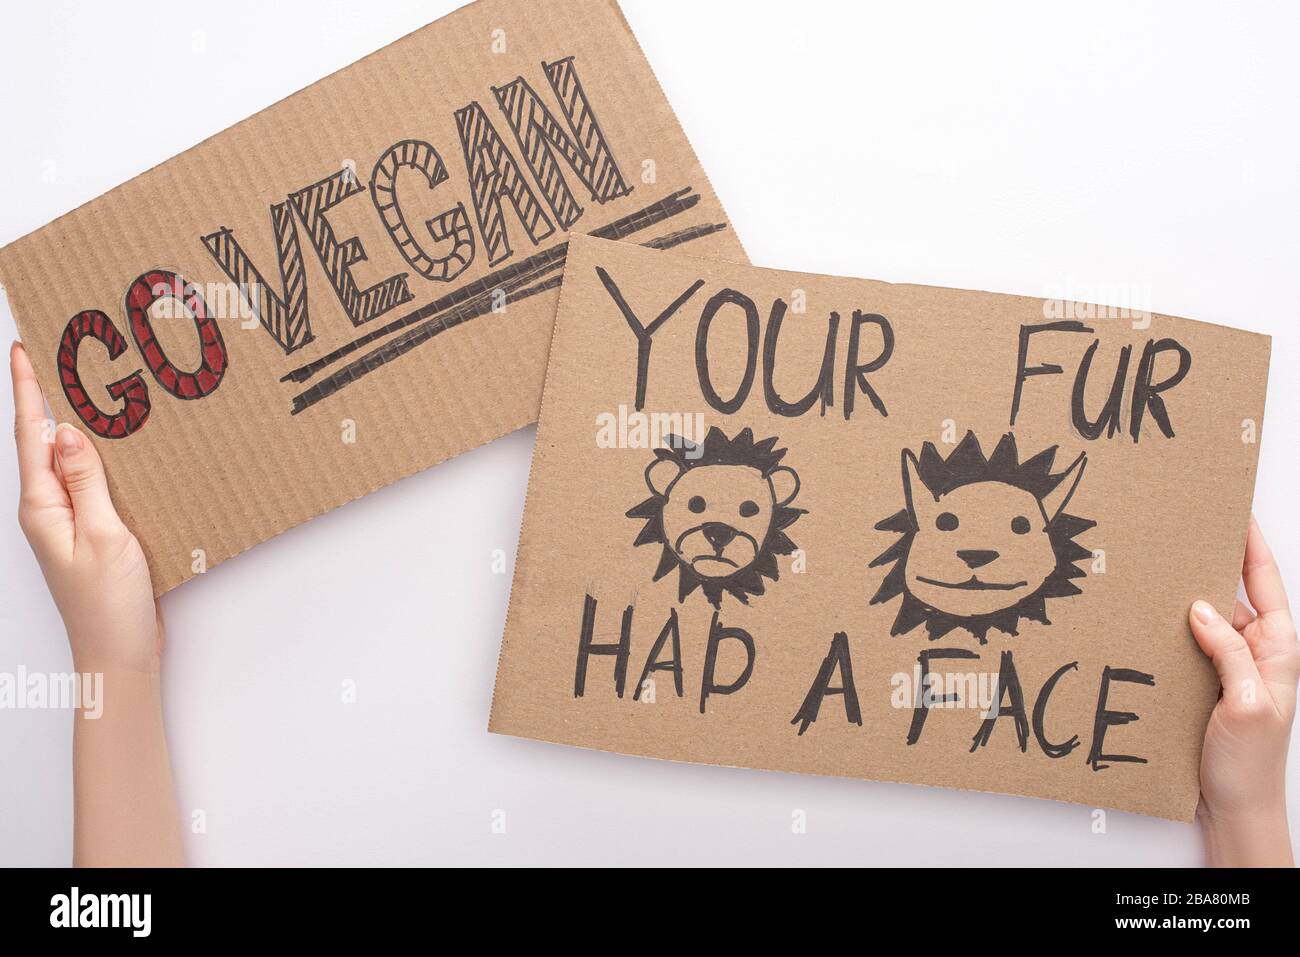 partial view of woman holding cardboard signs with go vegan and your fur had face inscriptions on white background Stock Photo